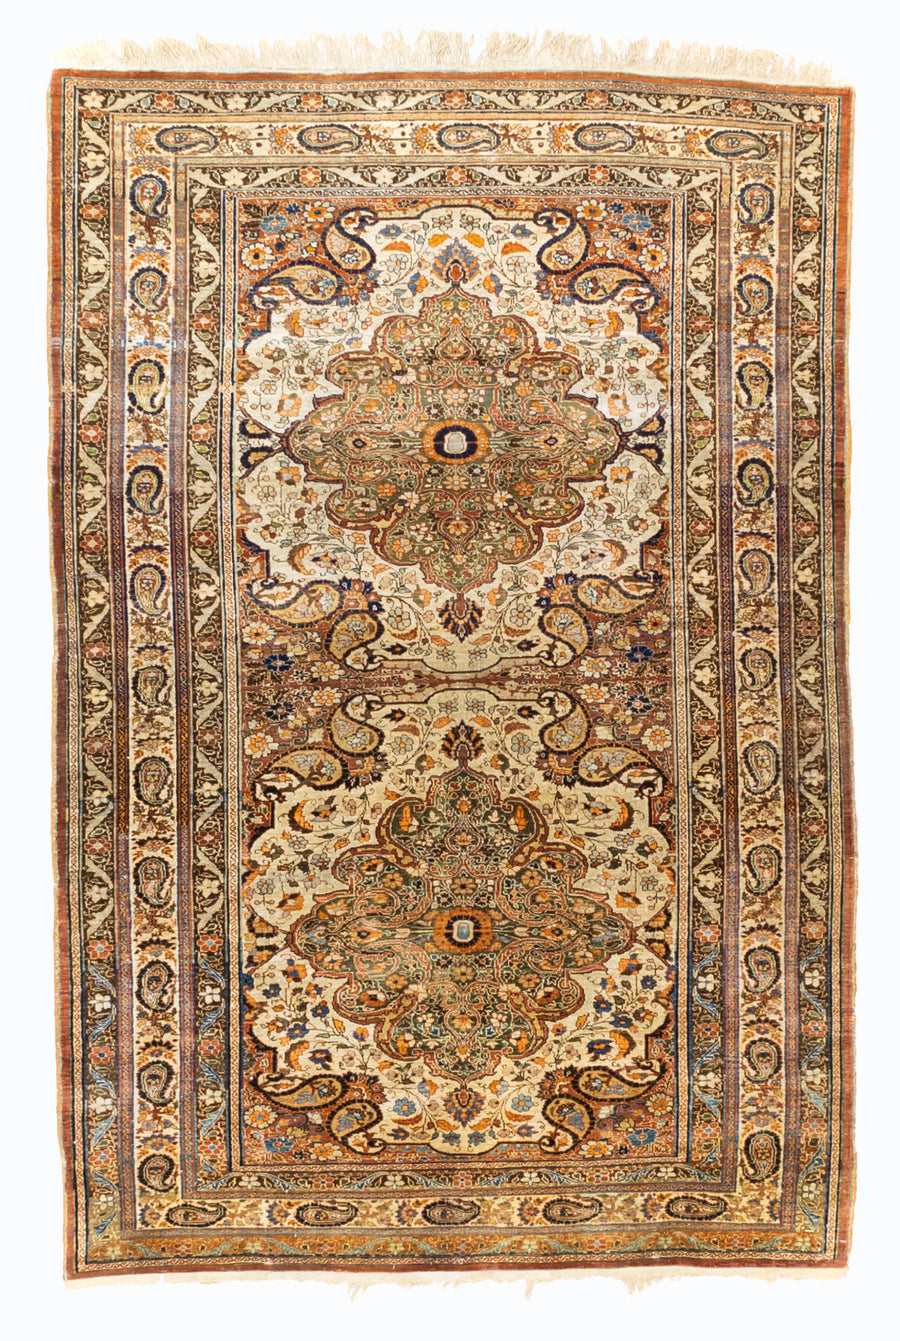 Extremely Fine and Rare Antique Persian pure Silk Heriz Rug